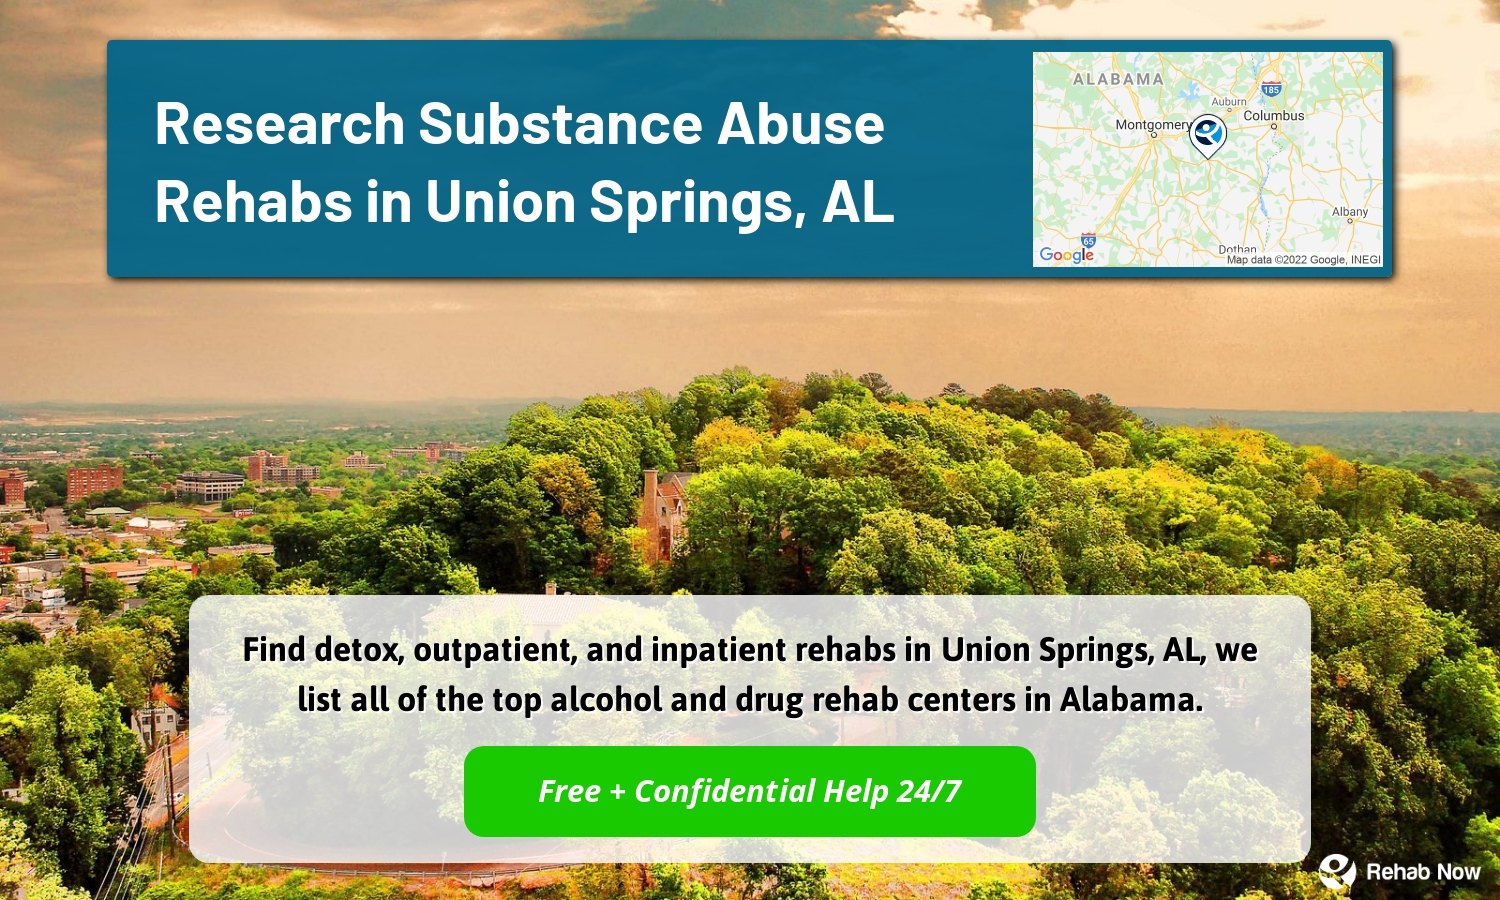 Find detox, outpatient, and inpatient rehabs in Union Springs, AL, we list all of the top alcohol and drug rehab centers in Alabama.